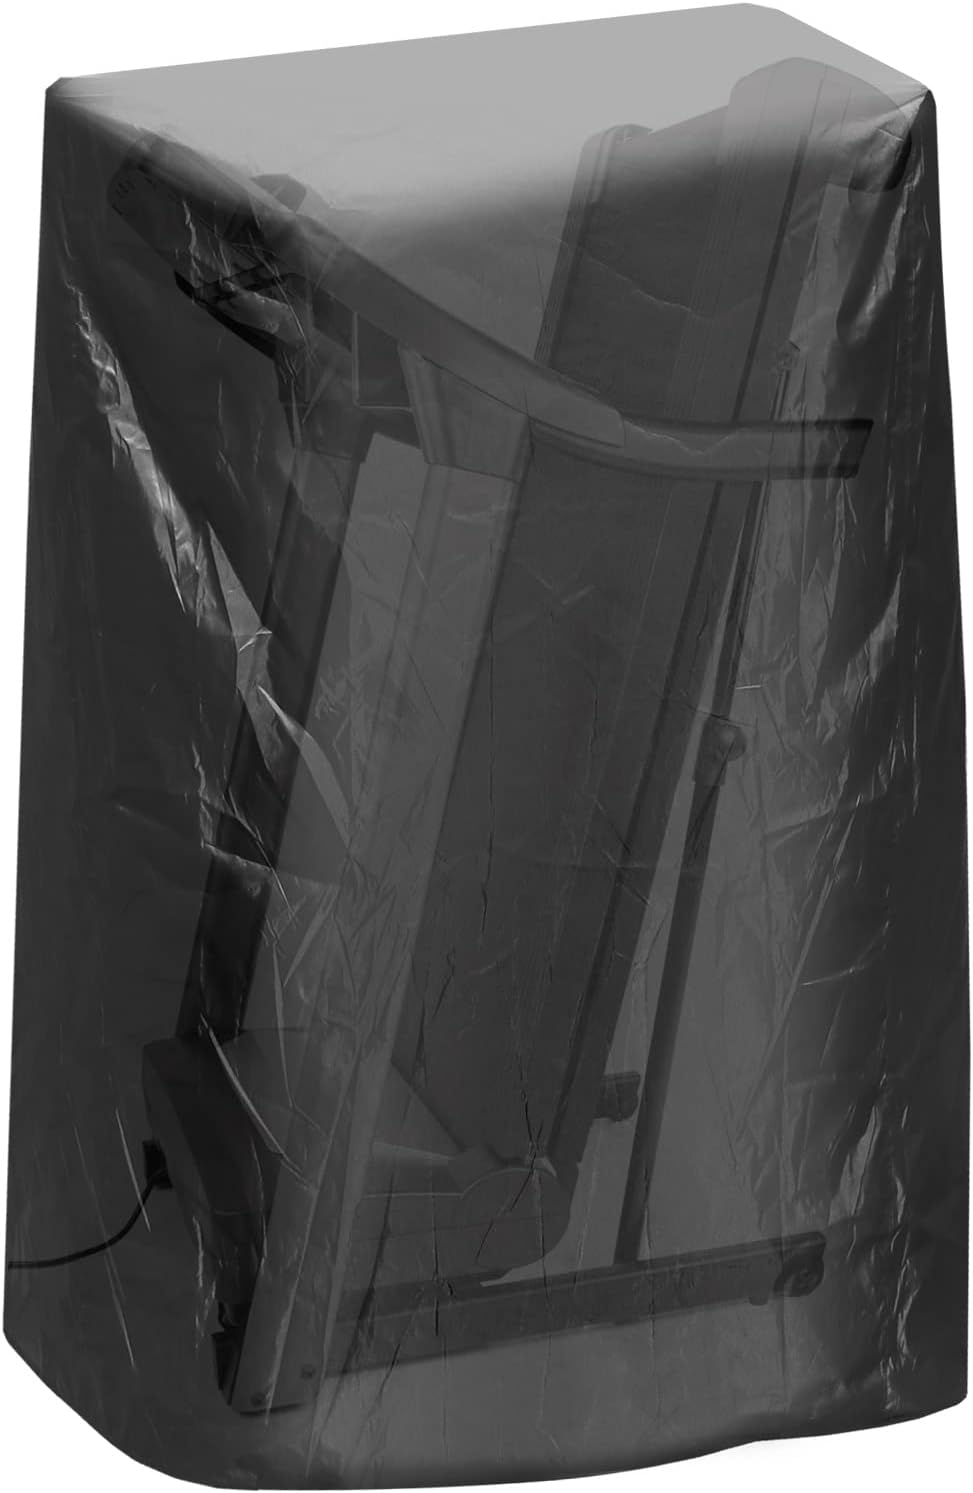 QWORK Black Treadmill Cover - Waterproof and Durable 46 L x 38 W x 66 H - Suitable for Most Folding Treadmills - Comes with Storage Bag